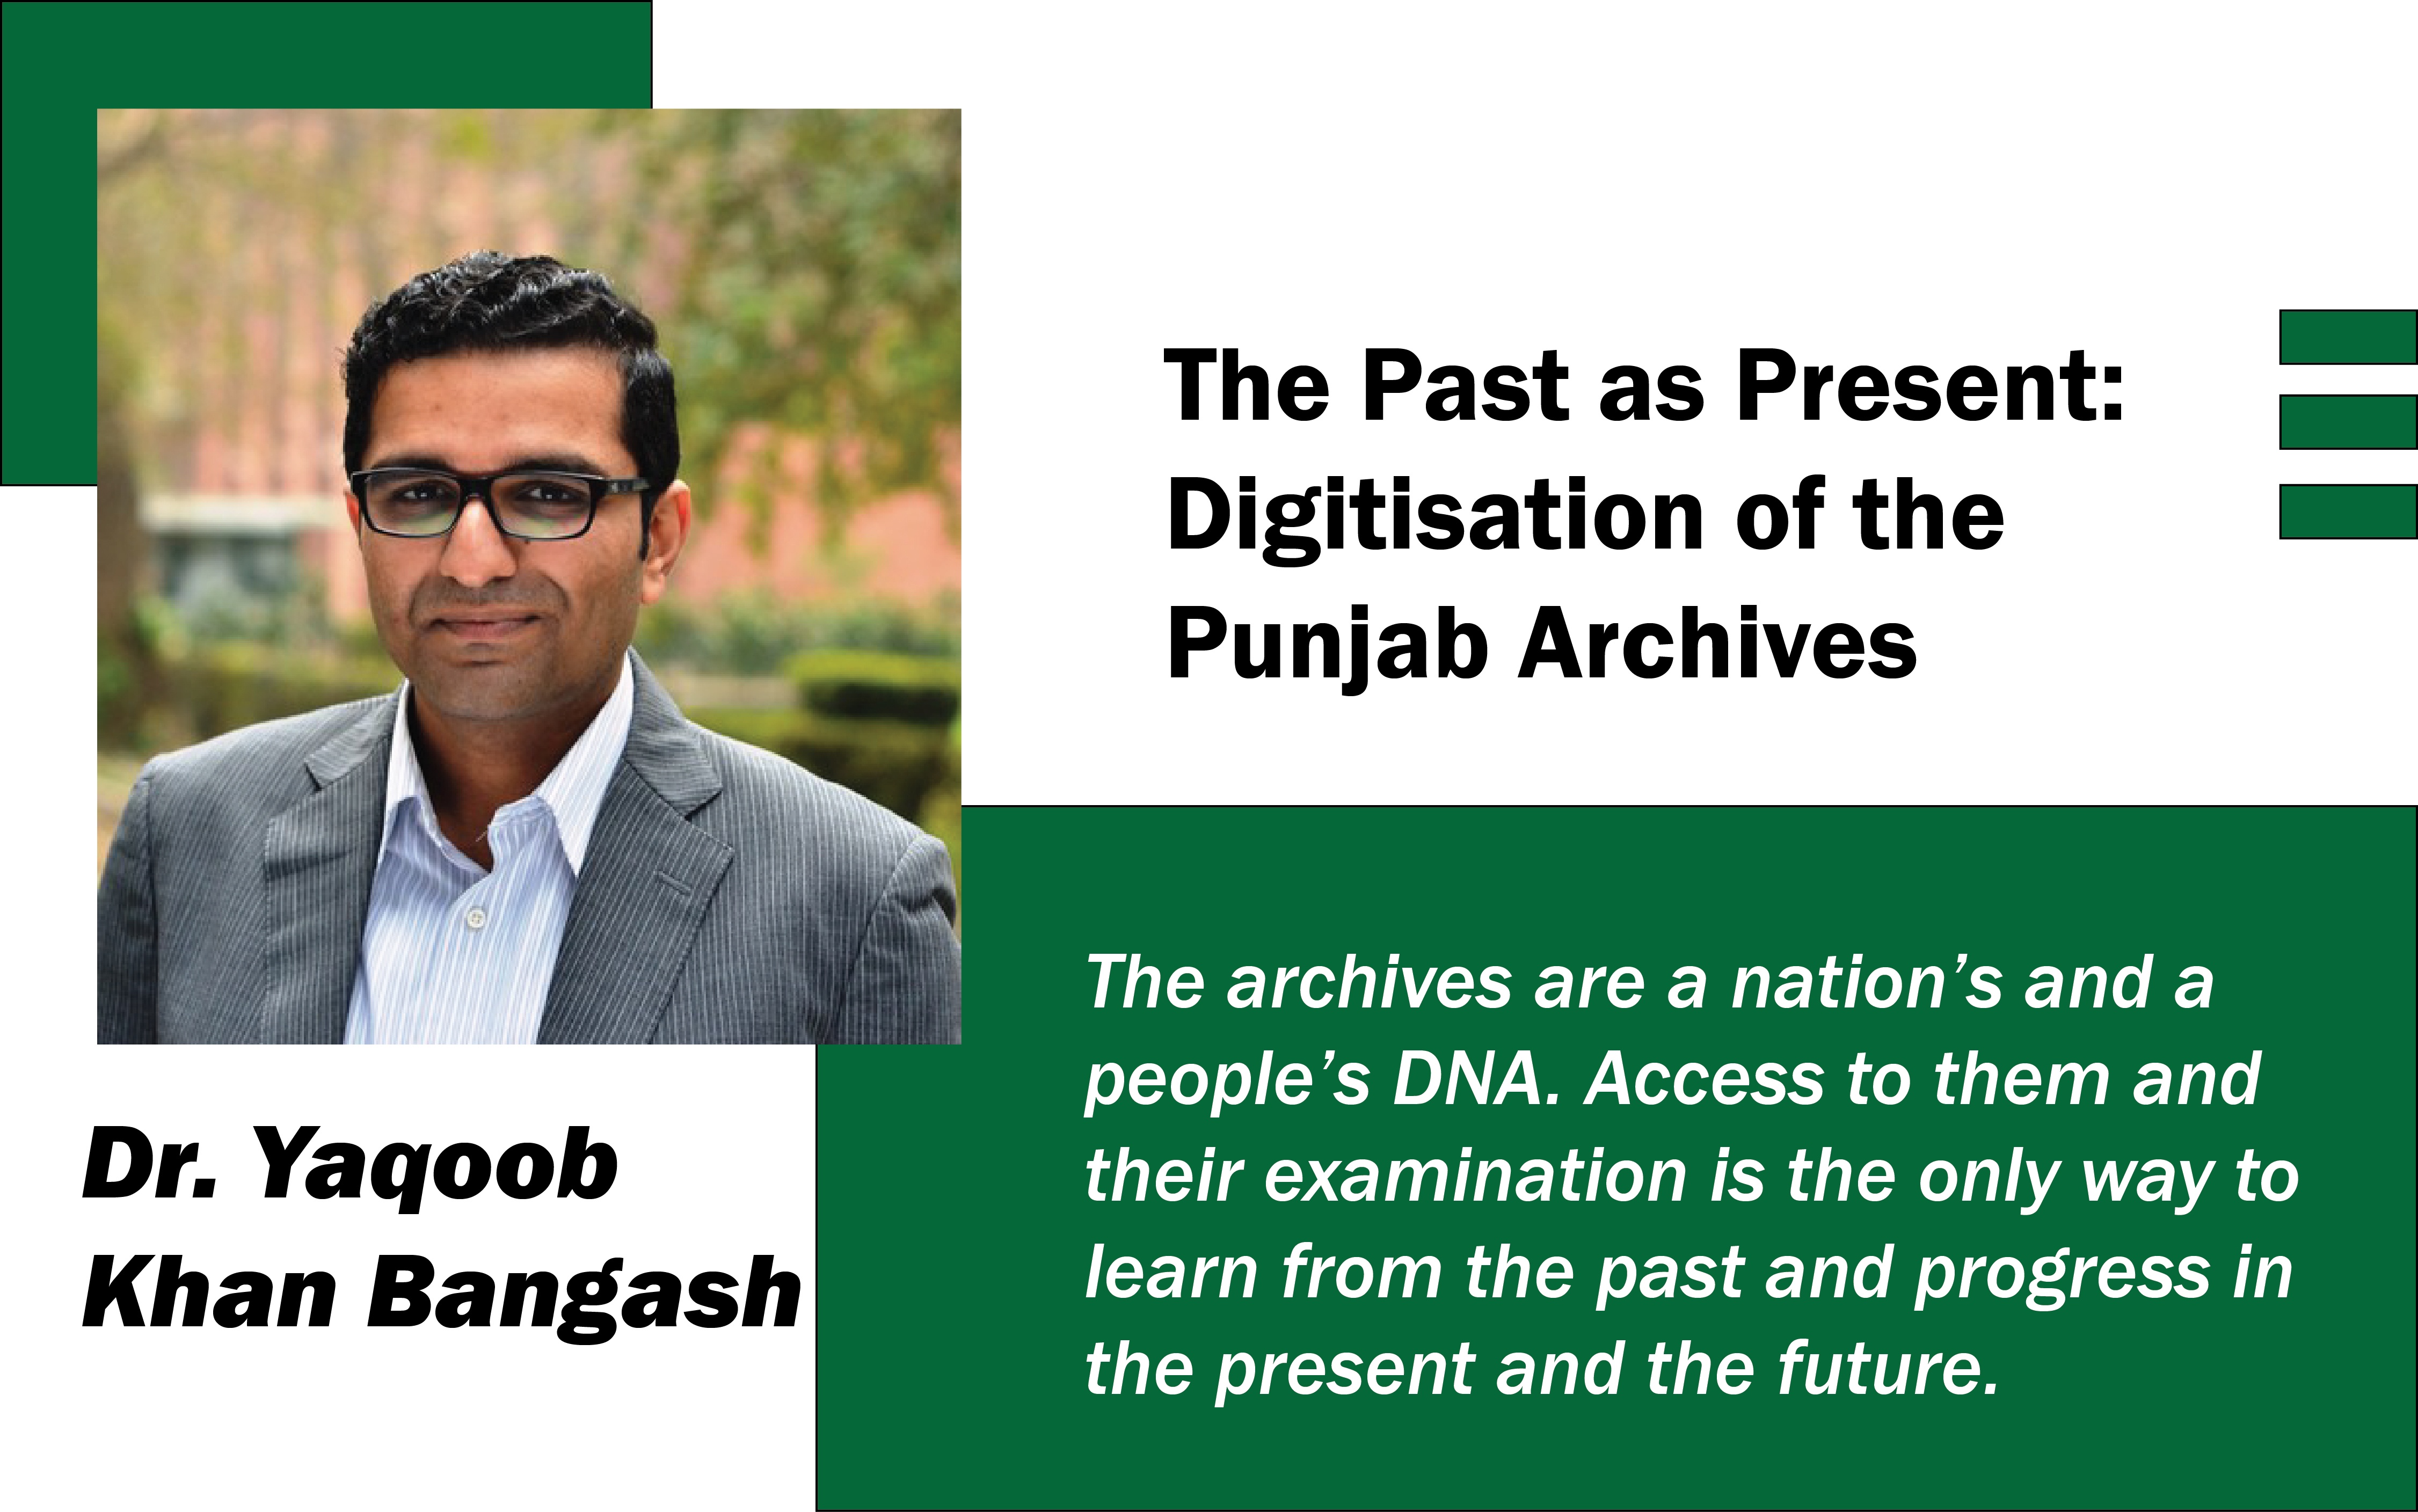 The Past as Present: DIGITIsATION of the Punjab Archives